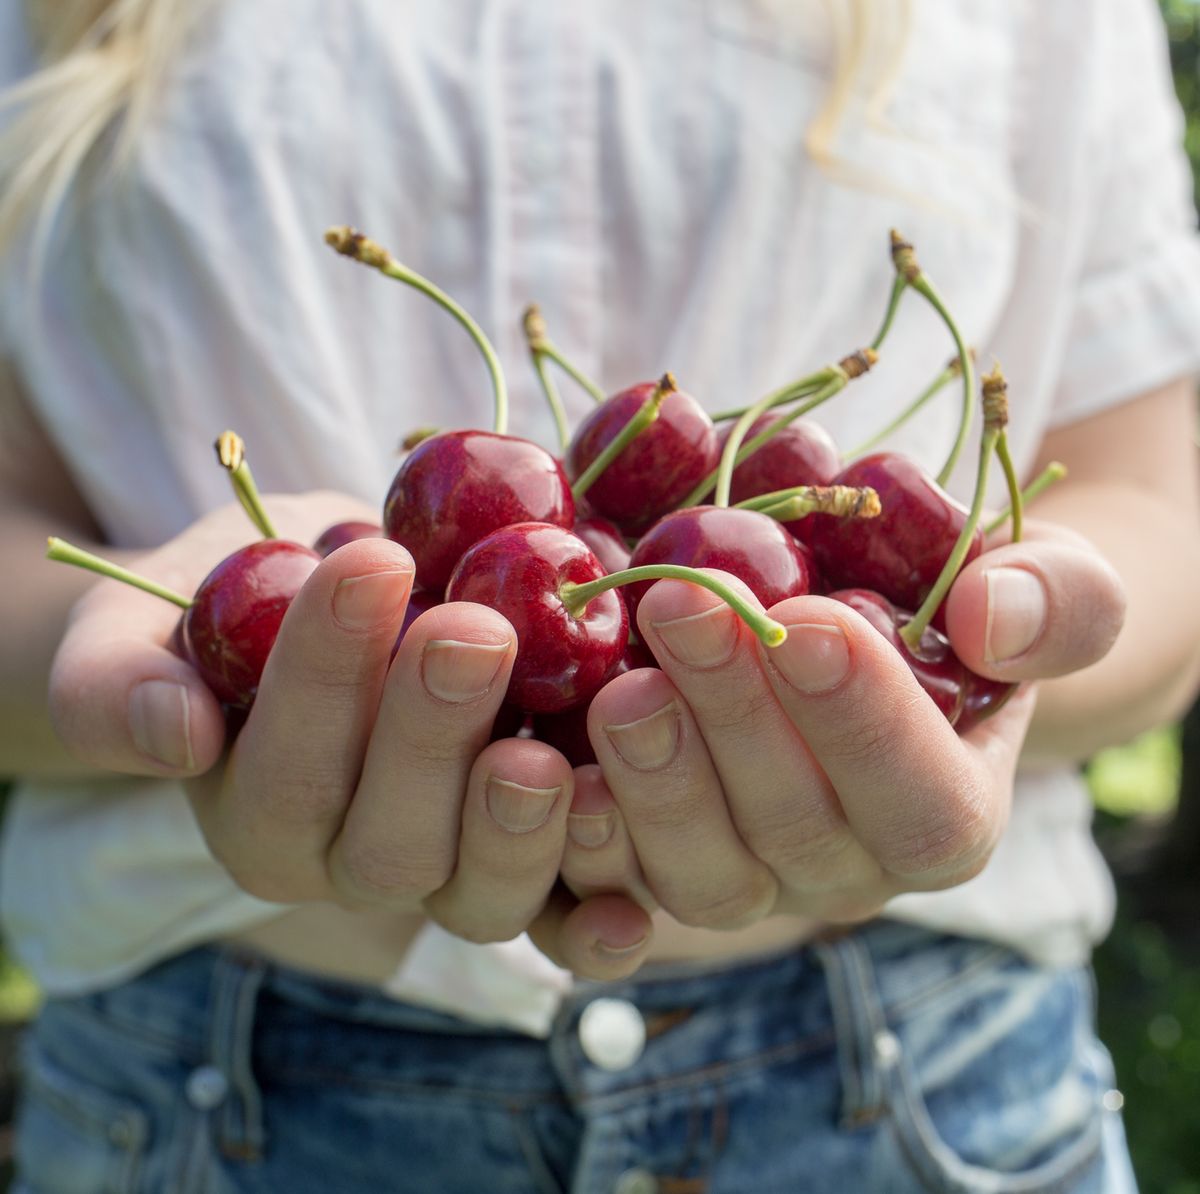 7 Things You Never Knew About Sweet Cherries